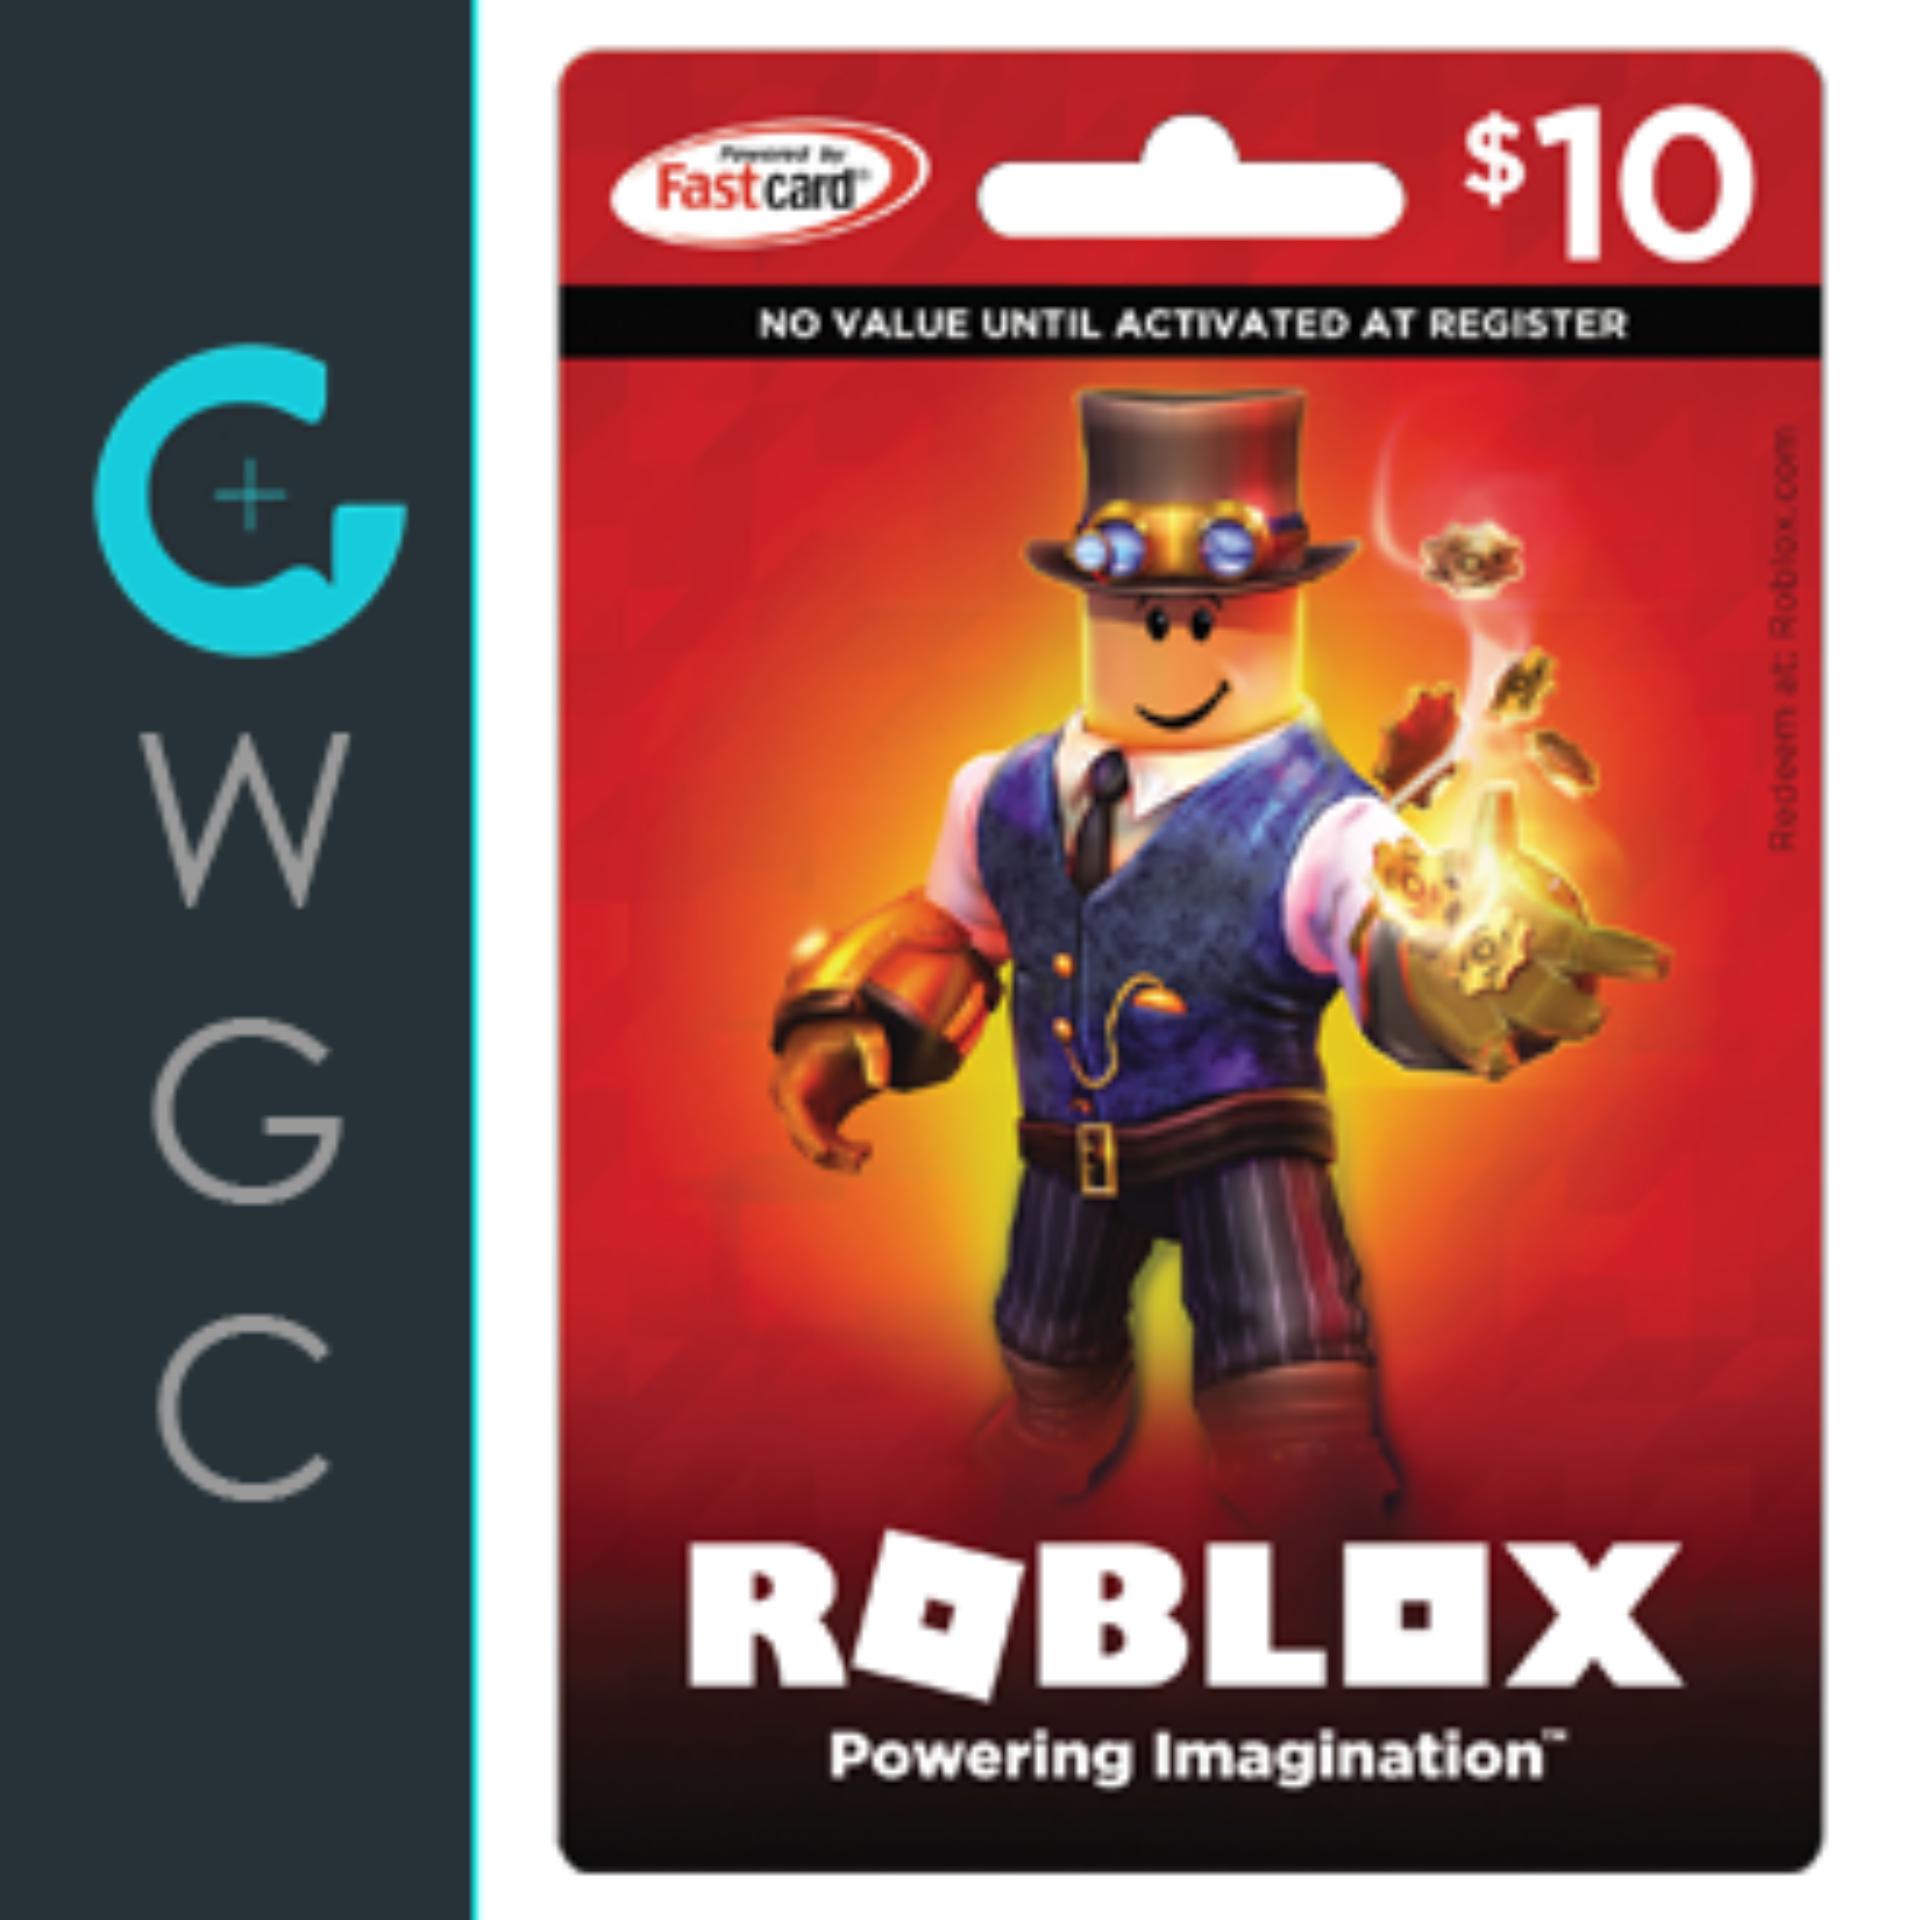 Roblox Value Card Get 5 000 Robux For Watching A Video - roblox cards value buxgg roblox 2019